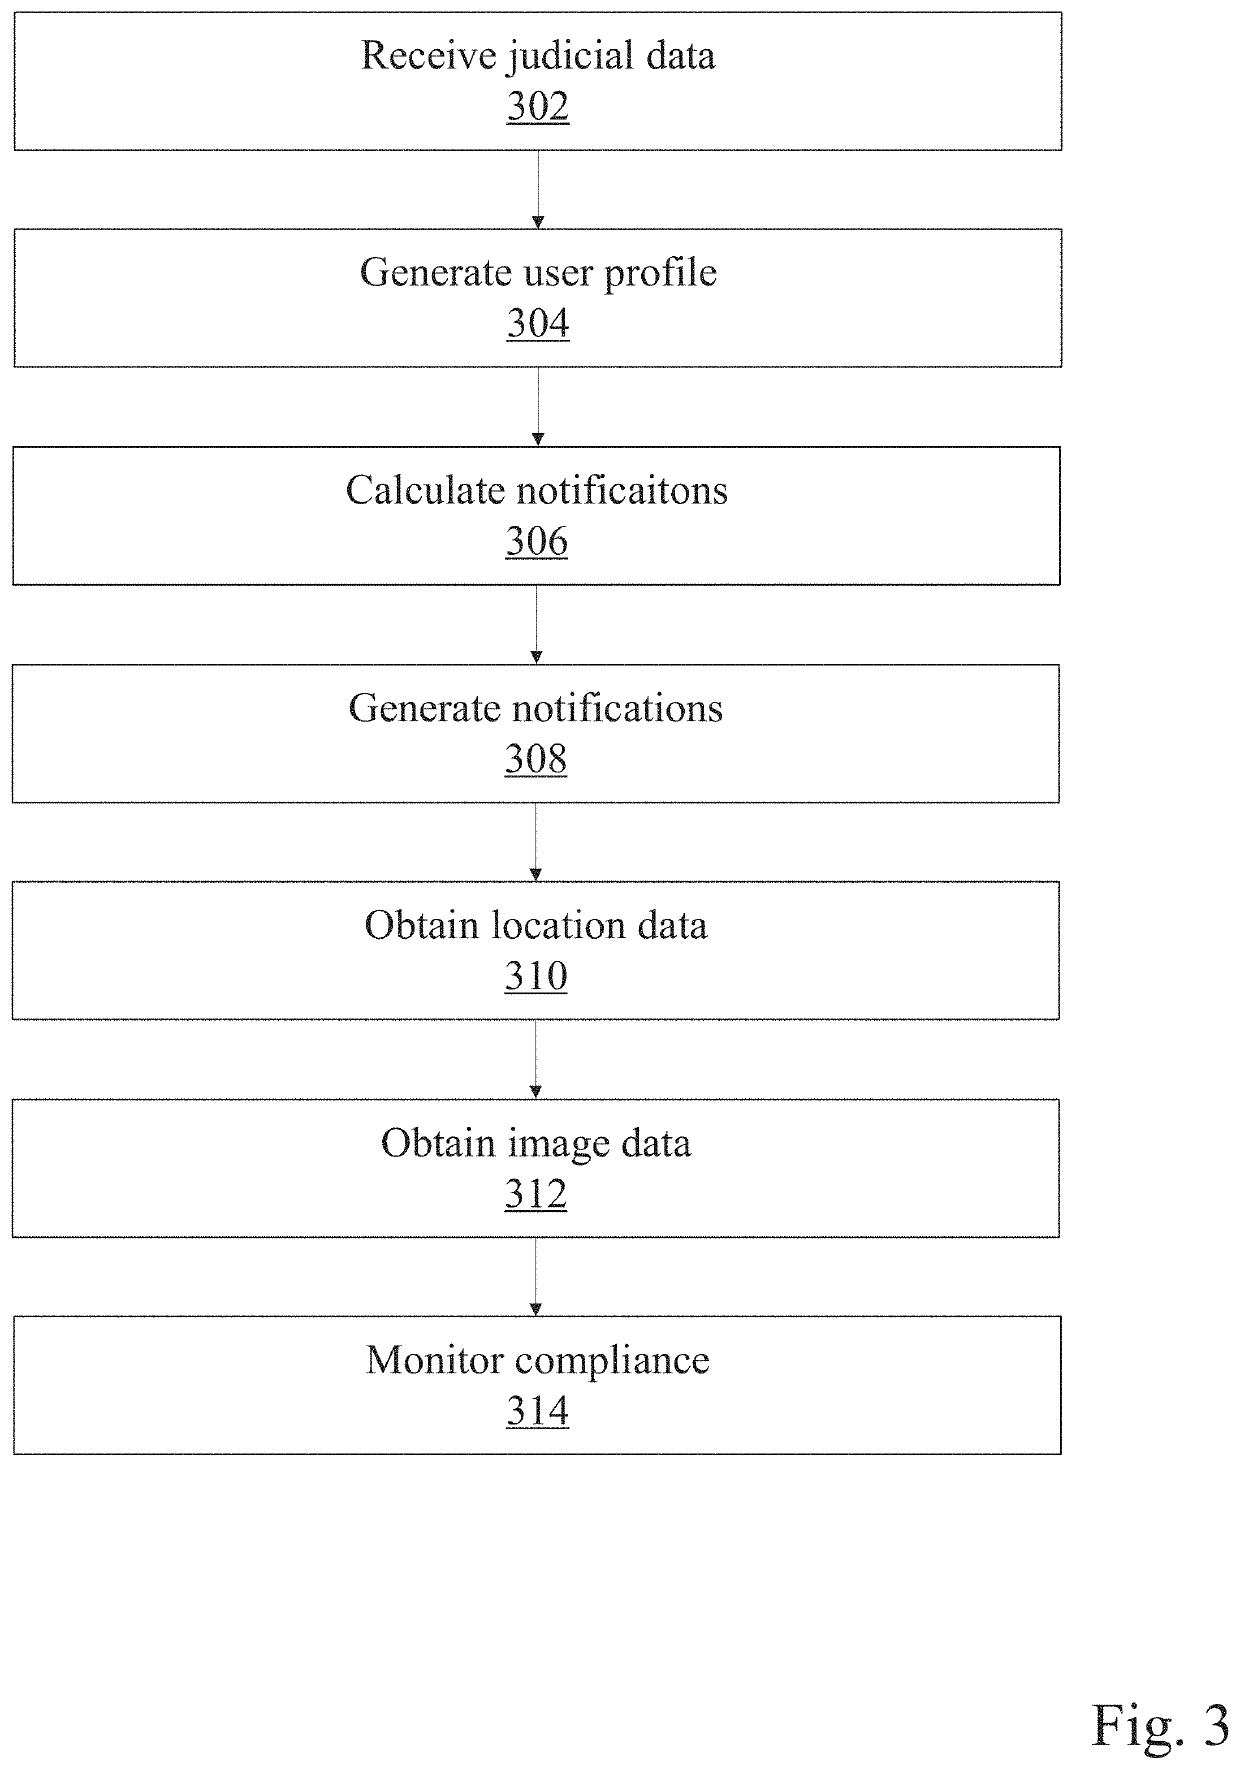 Systems and applications for automatically identifying and verifying vehicle license plate data